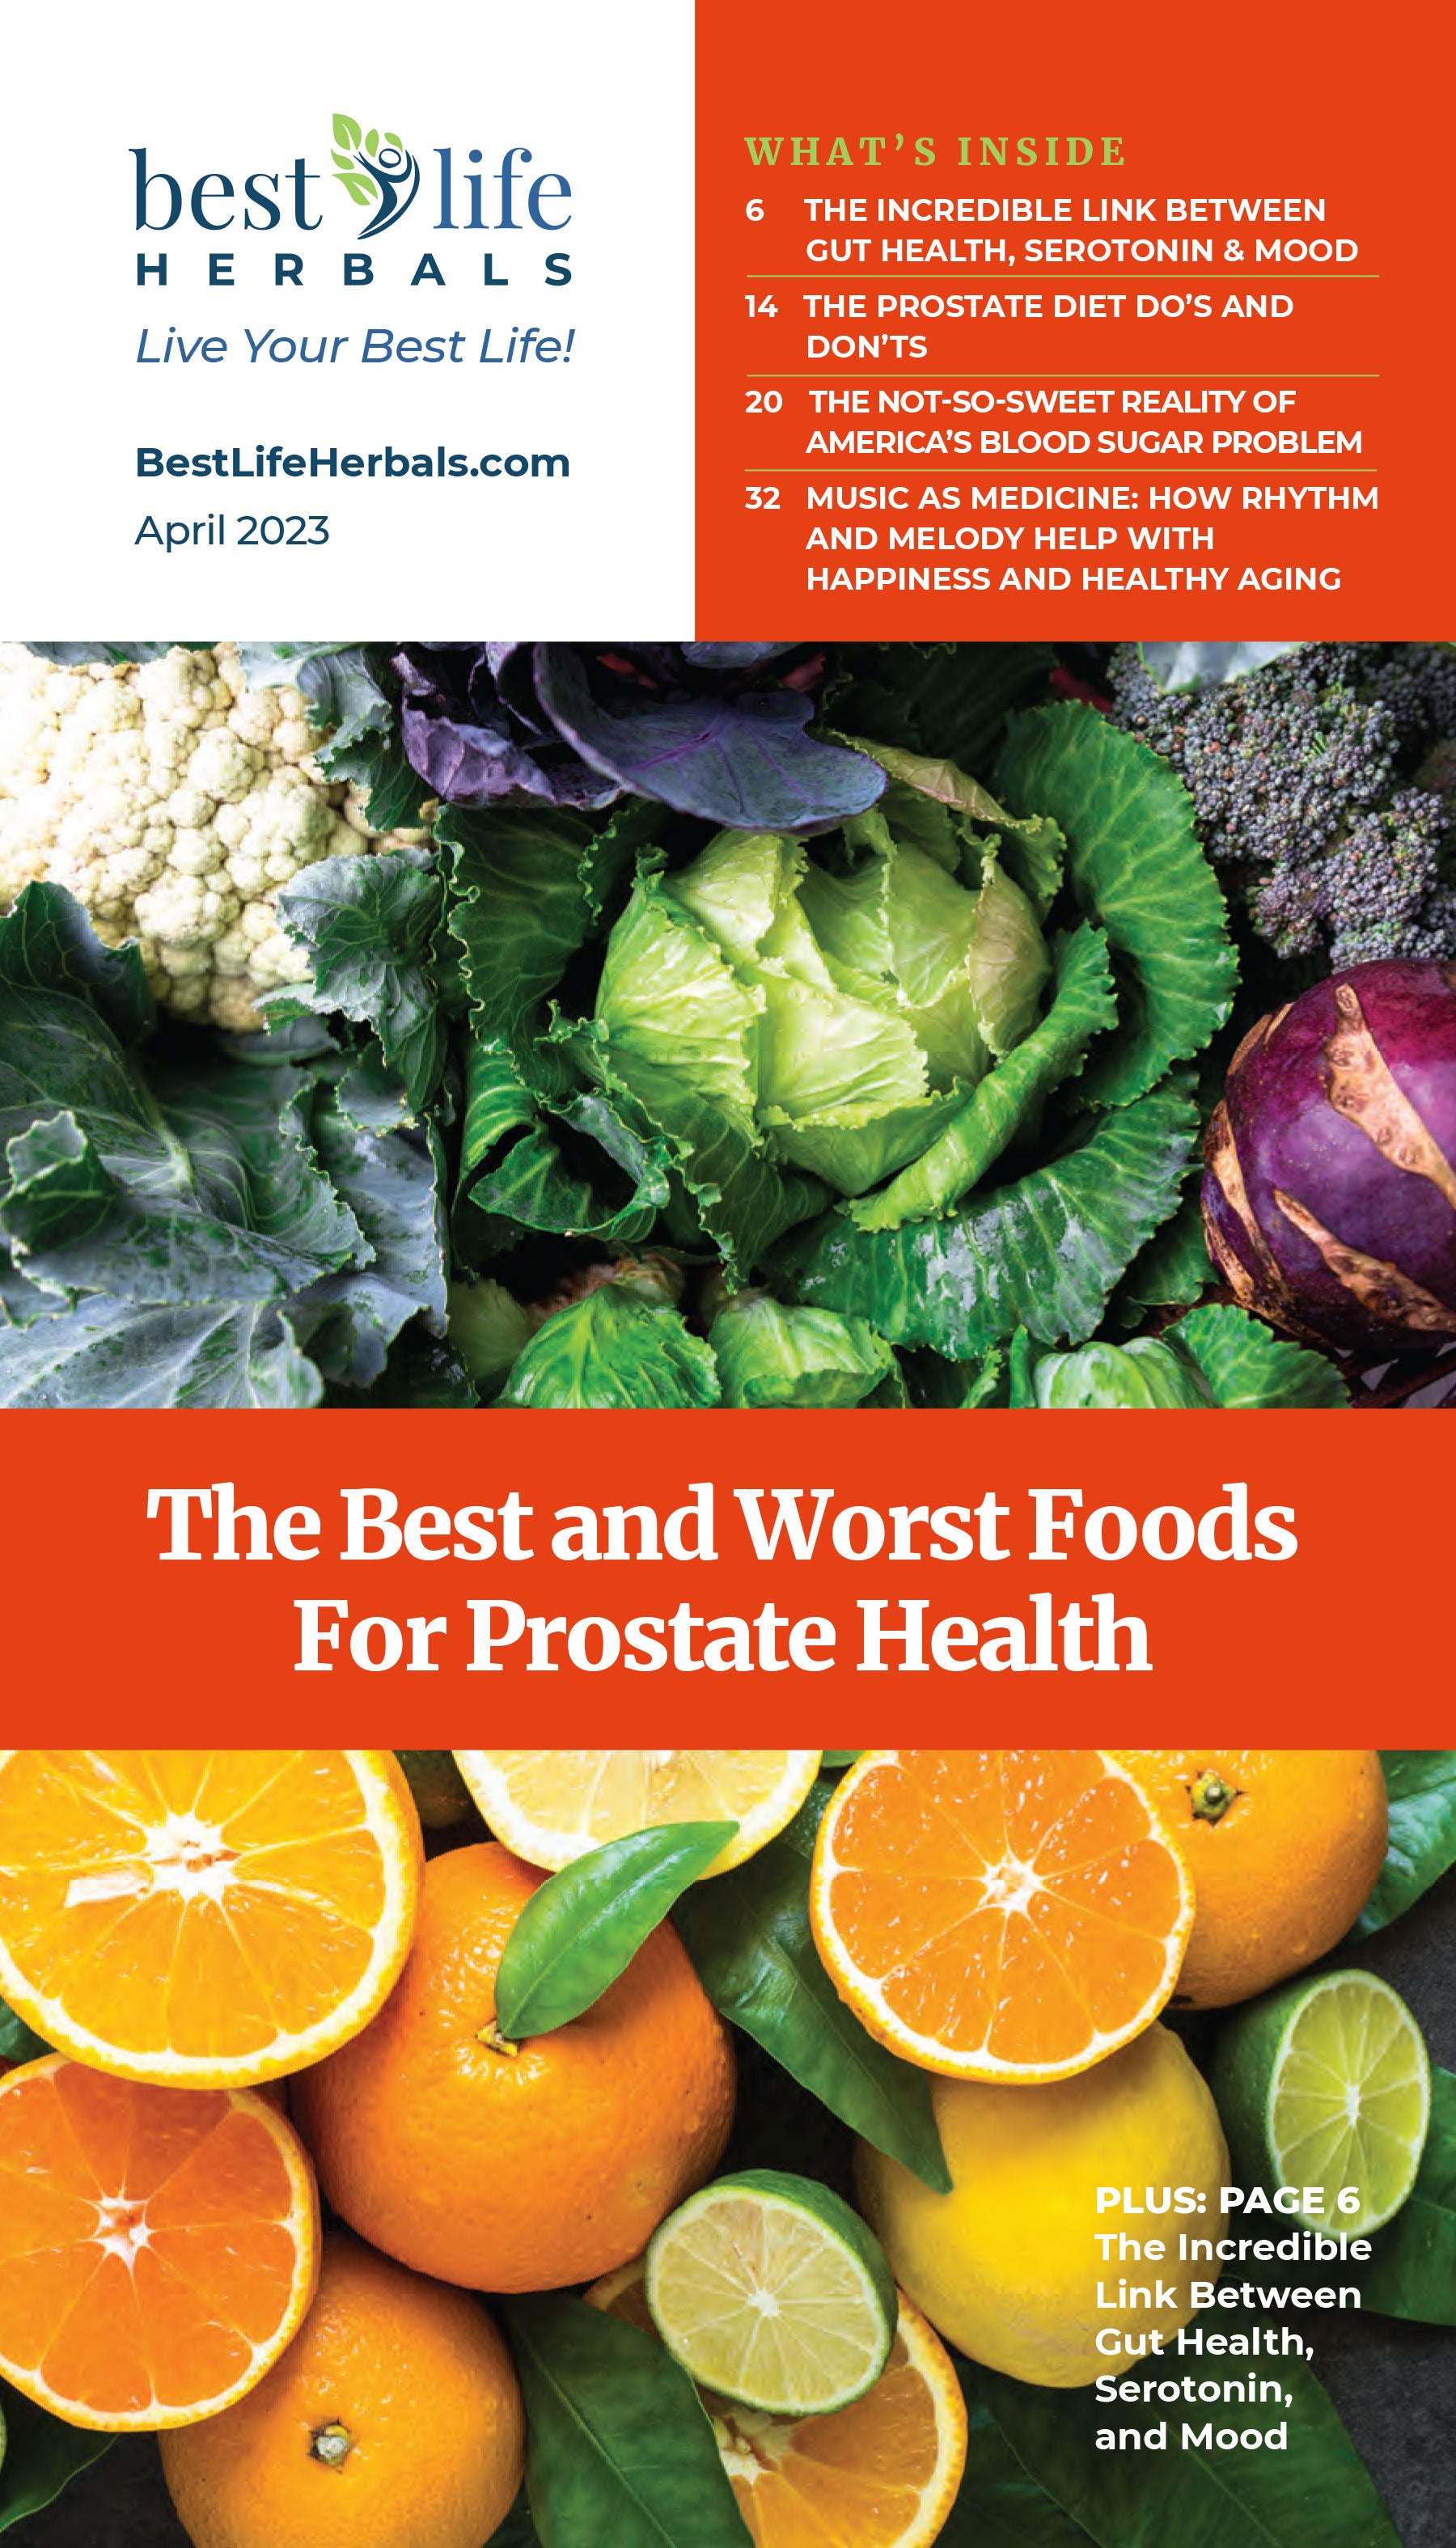 The Best and Worst Foods for Prostate Health